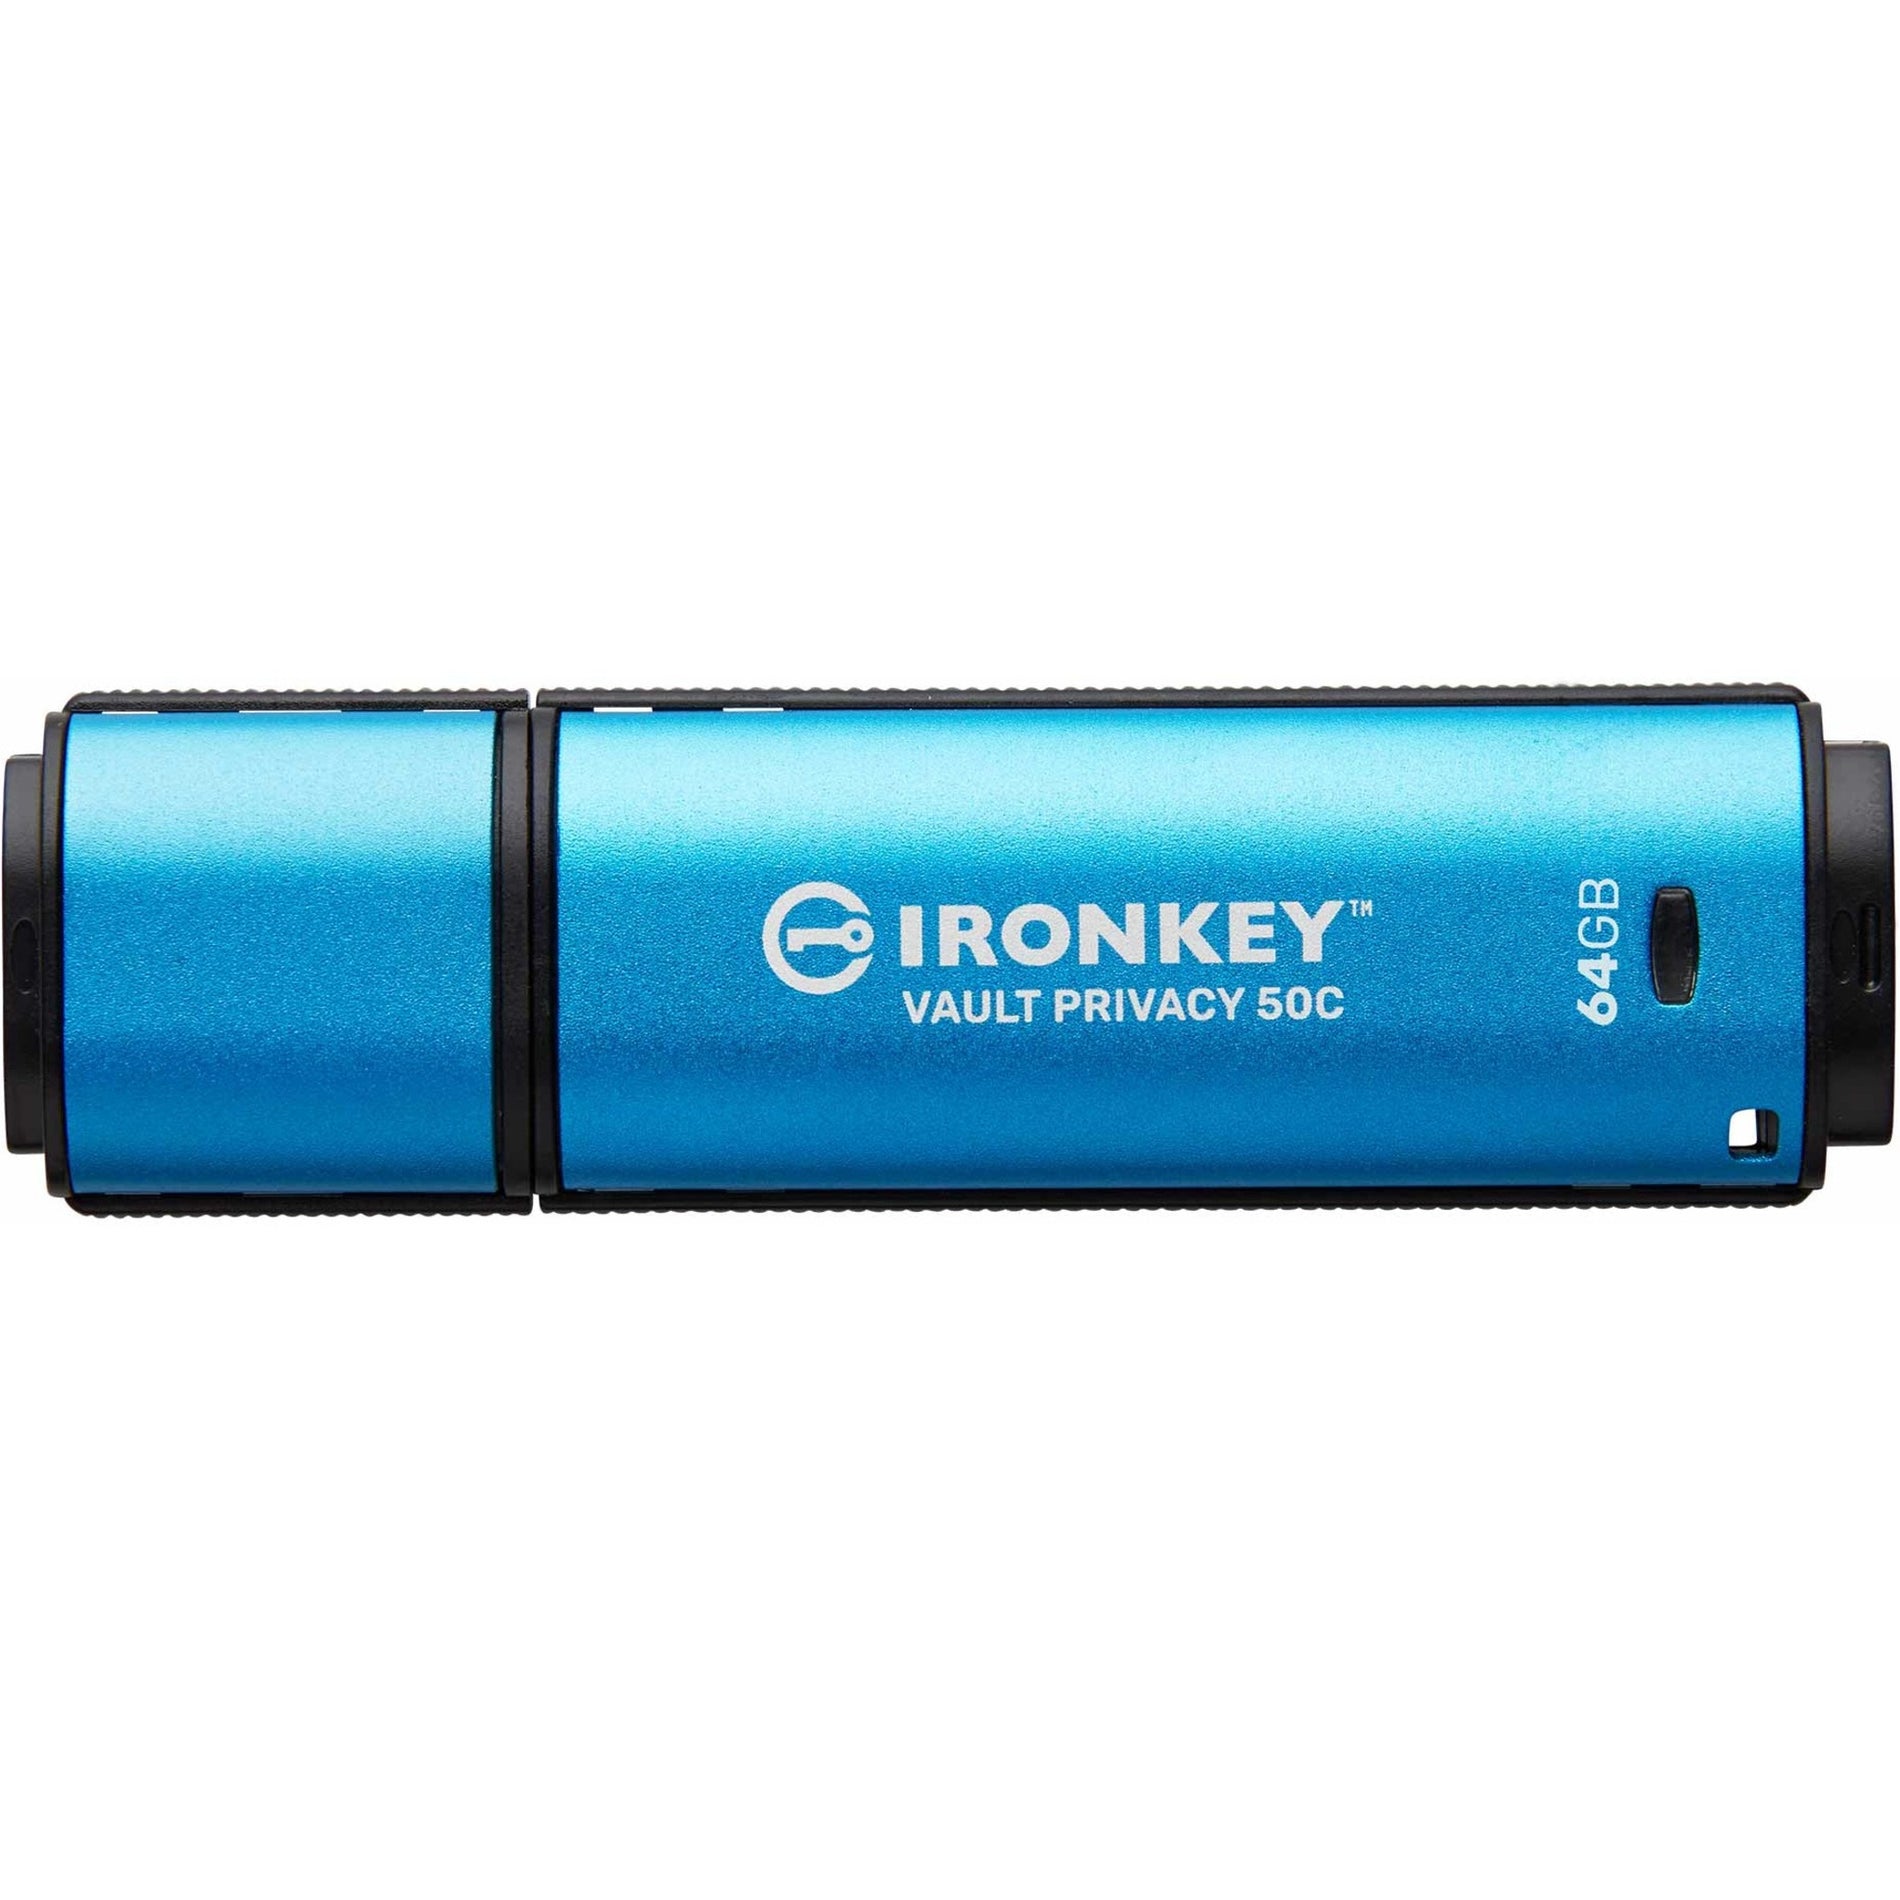 Kingston IKVP50C/64GB Vault Privacy 50 Series 64GB USB 3.2 (Gen 1) Type C Flash Drive, Water Proof, Password Protection, Read-only Mode, Admin and User Mode